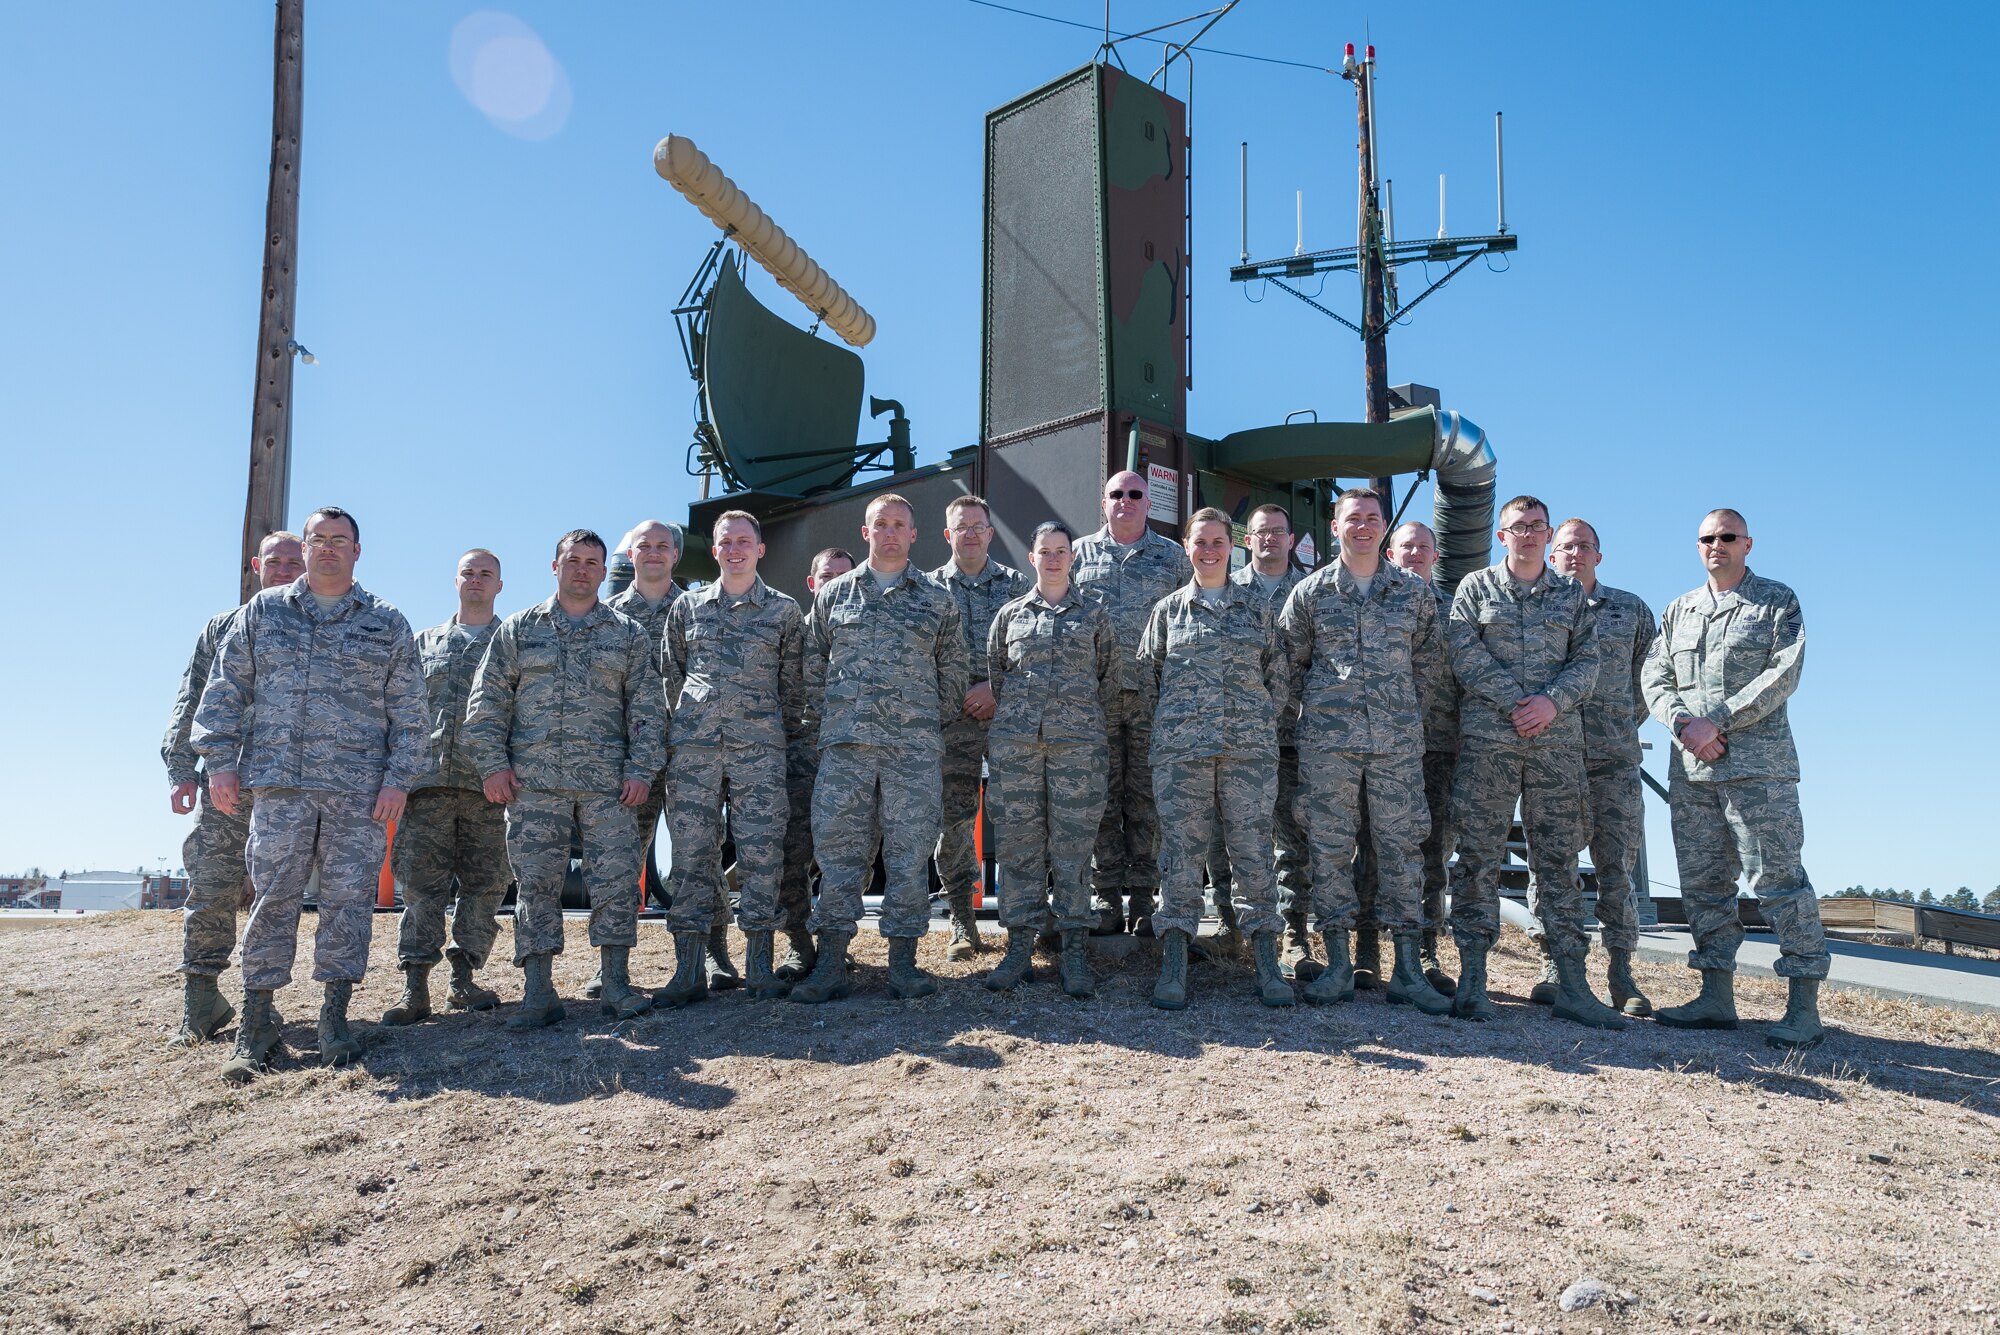 U.S. Air Force Airmen assigned to the 243rd Air Traffic Control Squadron, Wyoming Air National Guard, pose in front of a radar antenna March 10, near Cheyenne Regional Airport in Cheyenne, Wyoming. Members of the Radar and Approach Control were awarded the D. Ray Hardin Air Traffic Control Facility of the Year award for 2014. (U.S. Air National Guard photo by Master Sgt. Charles Delano/released)